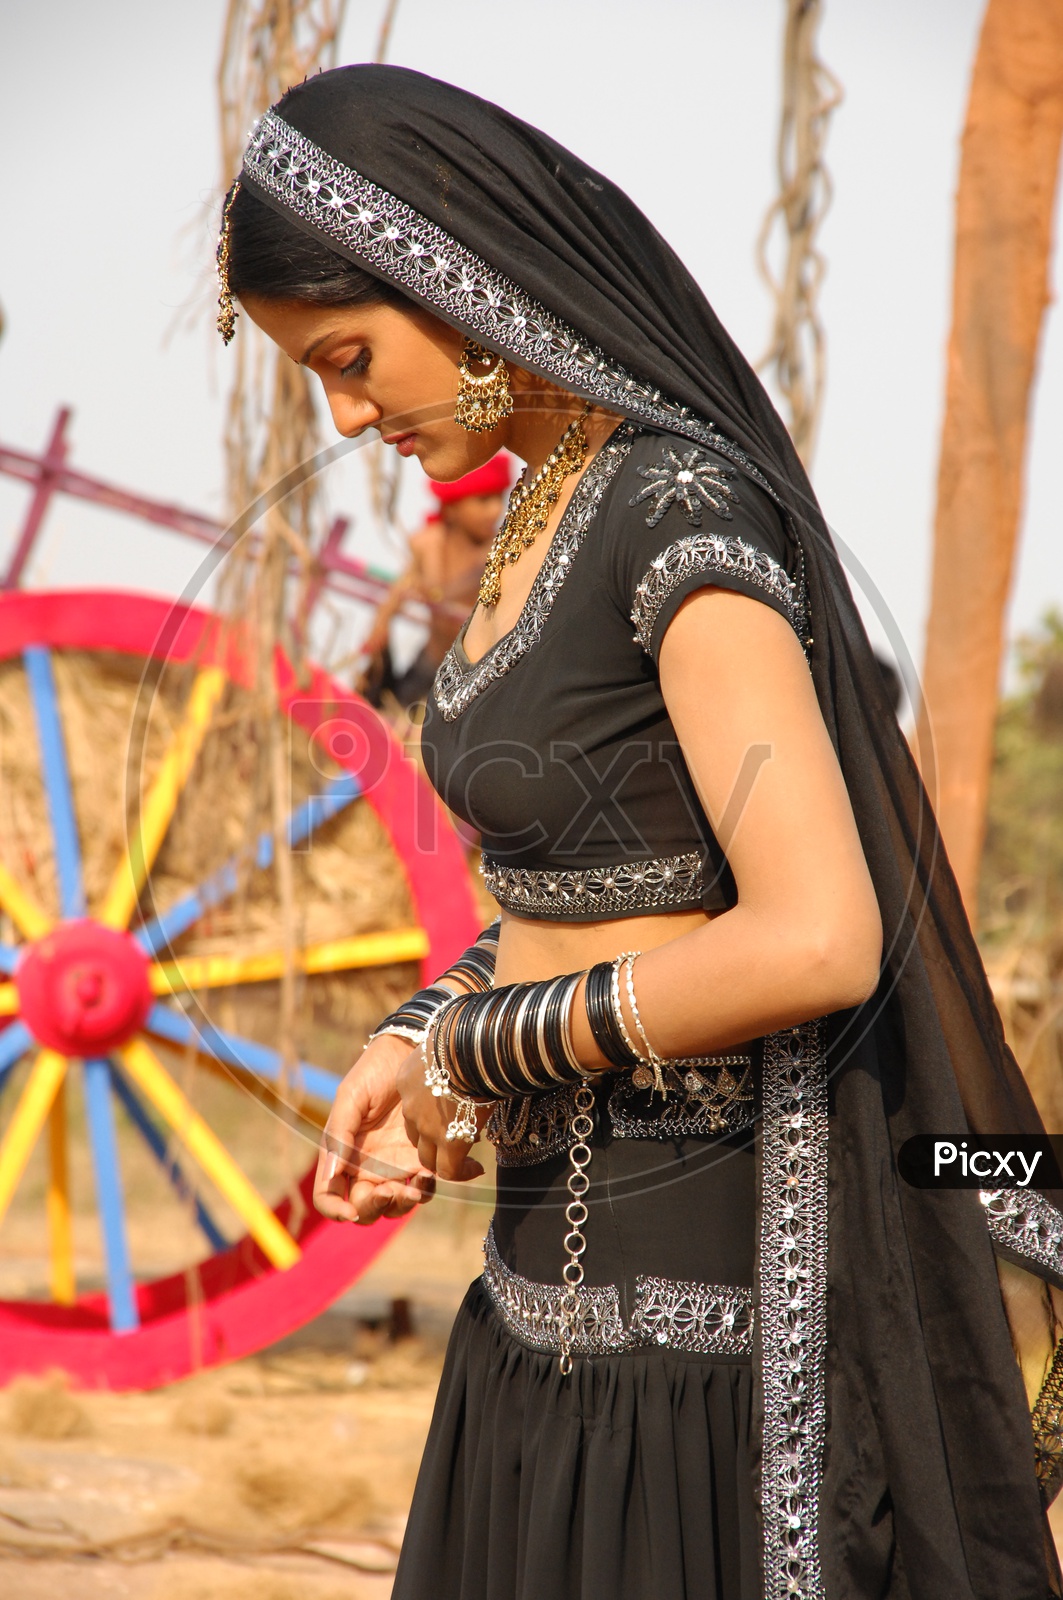 Tourist Attraction India: Rajasthani Women Dress | Rostros, Baile sensual,  Mujeres